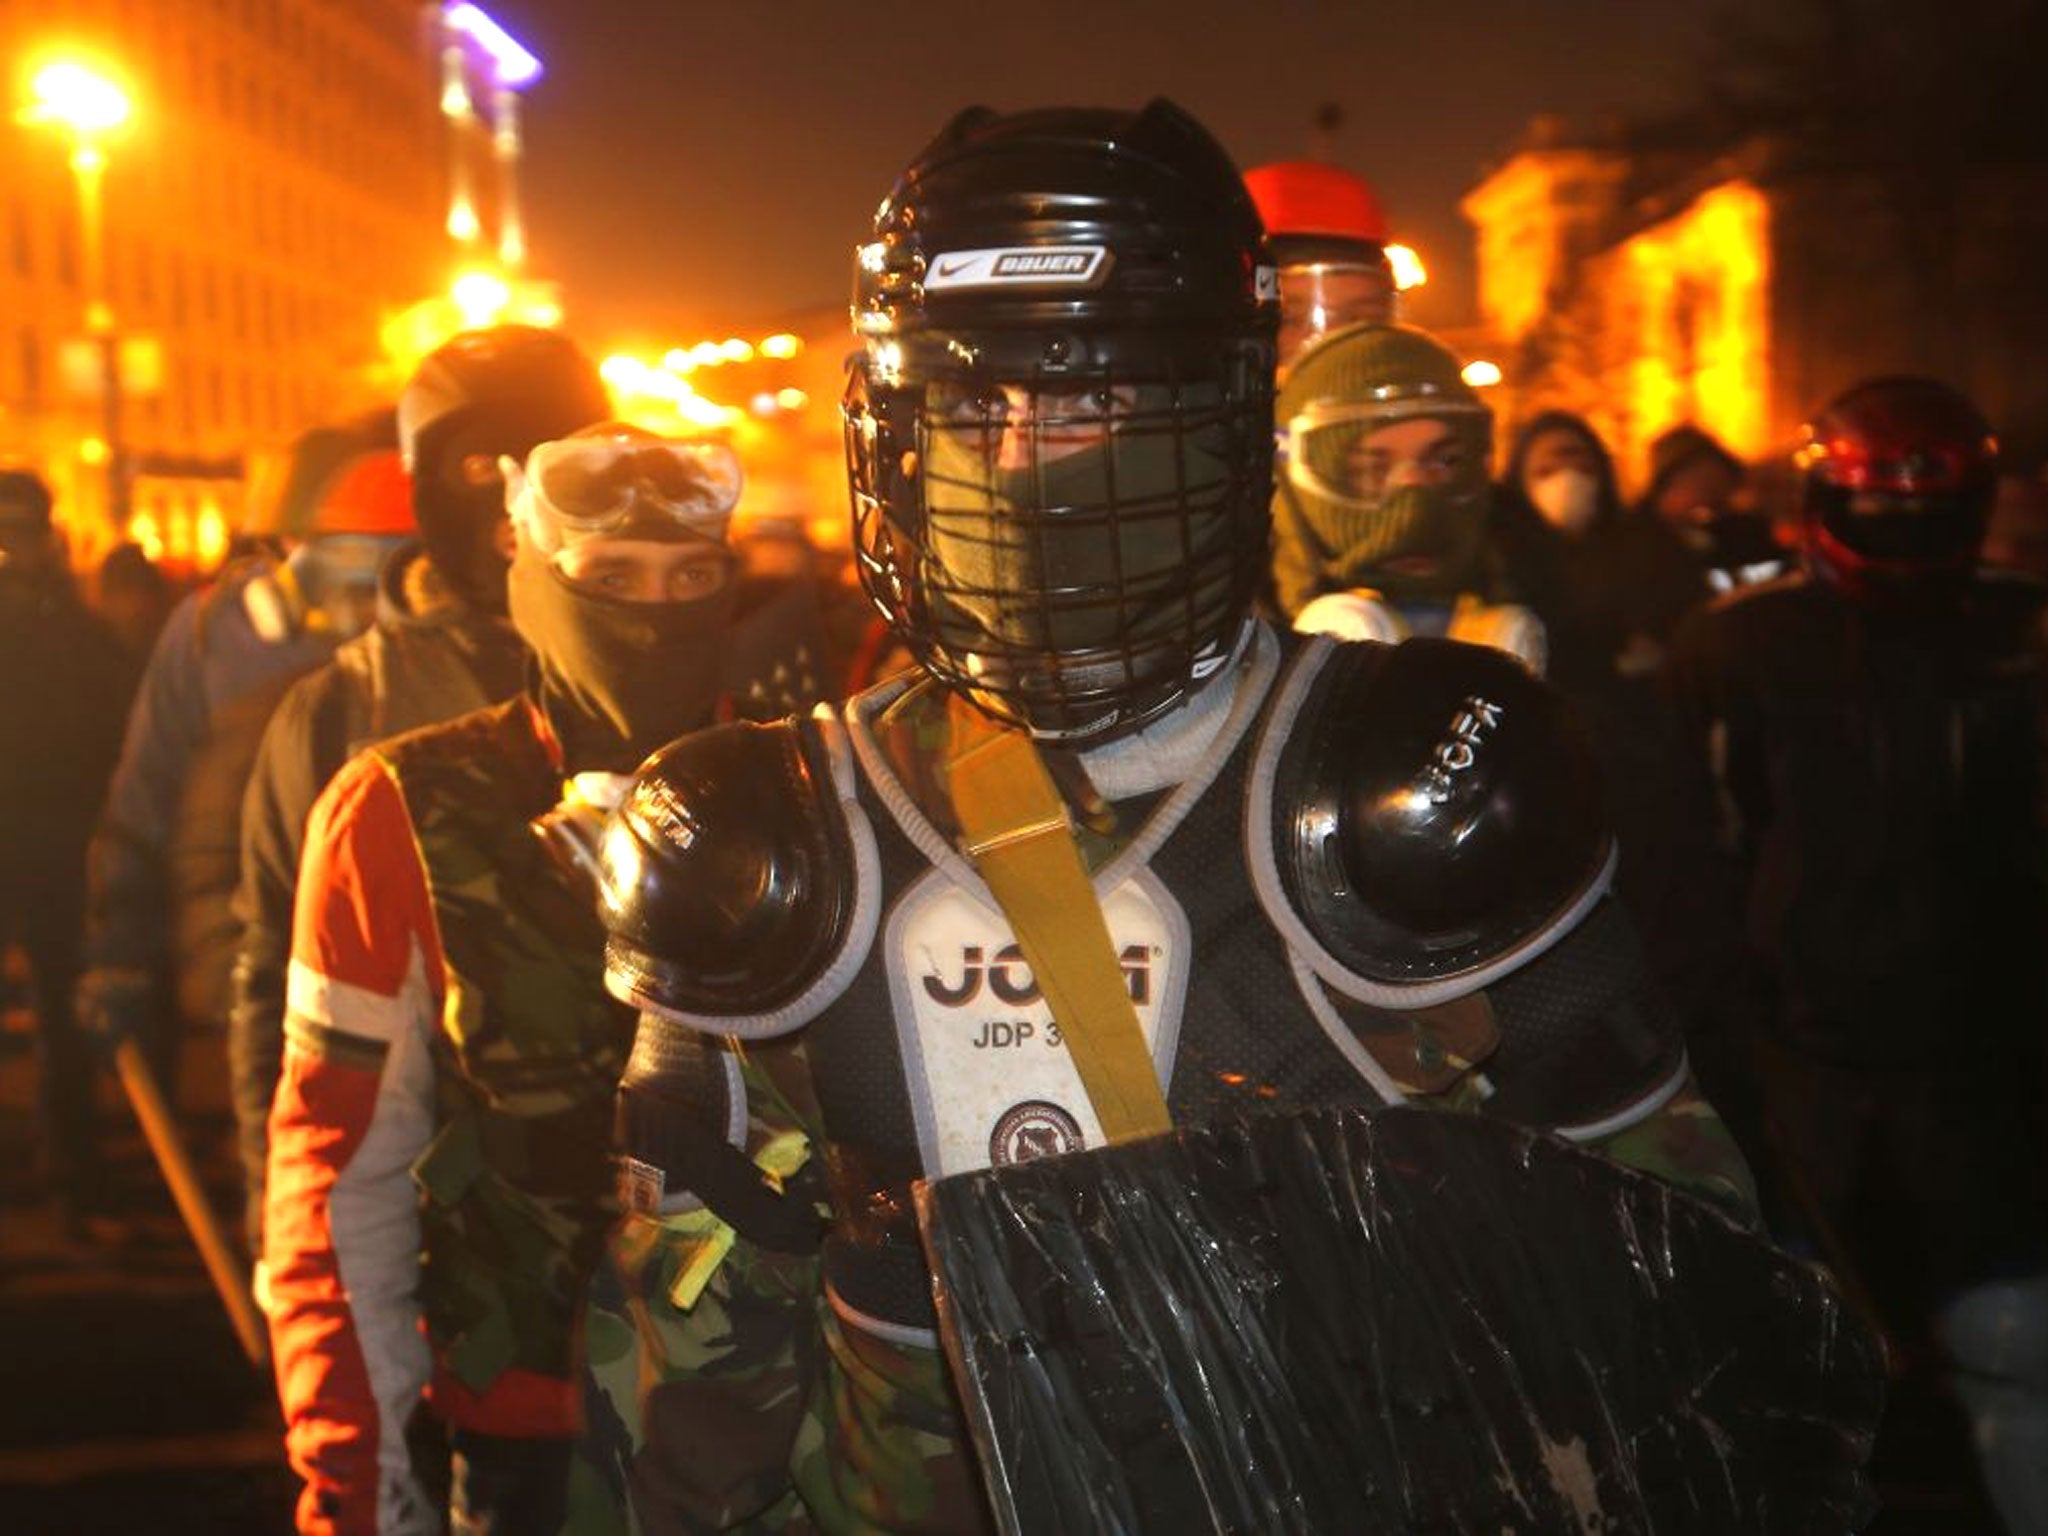 Protesters clad in improvised protective gear prepare for a clash with police in central Kiev